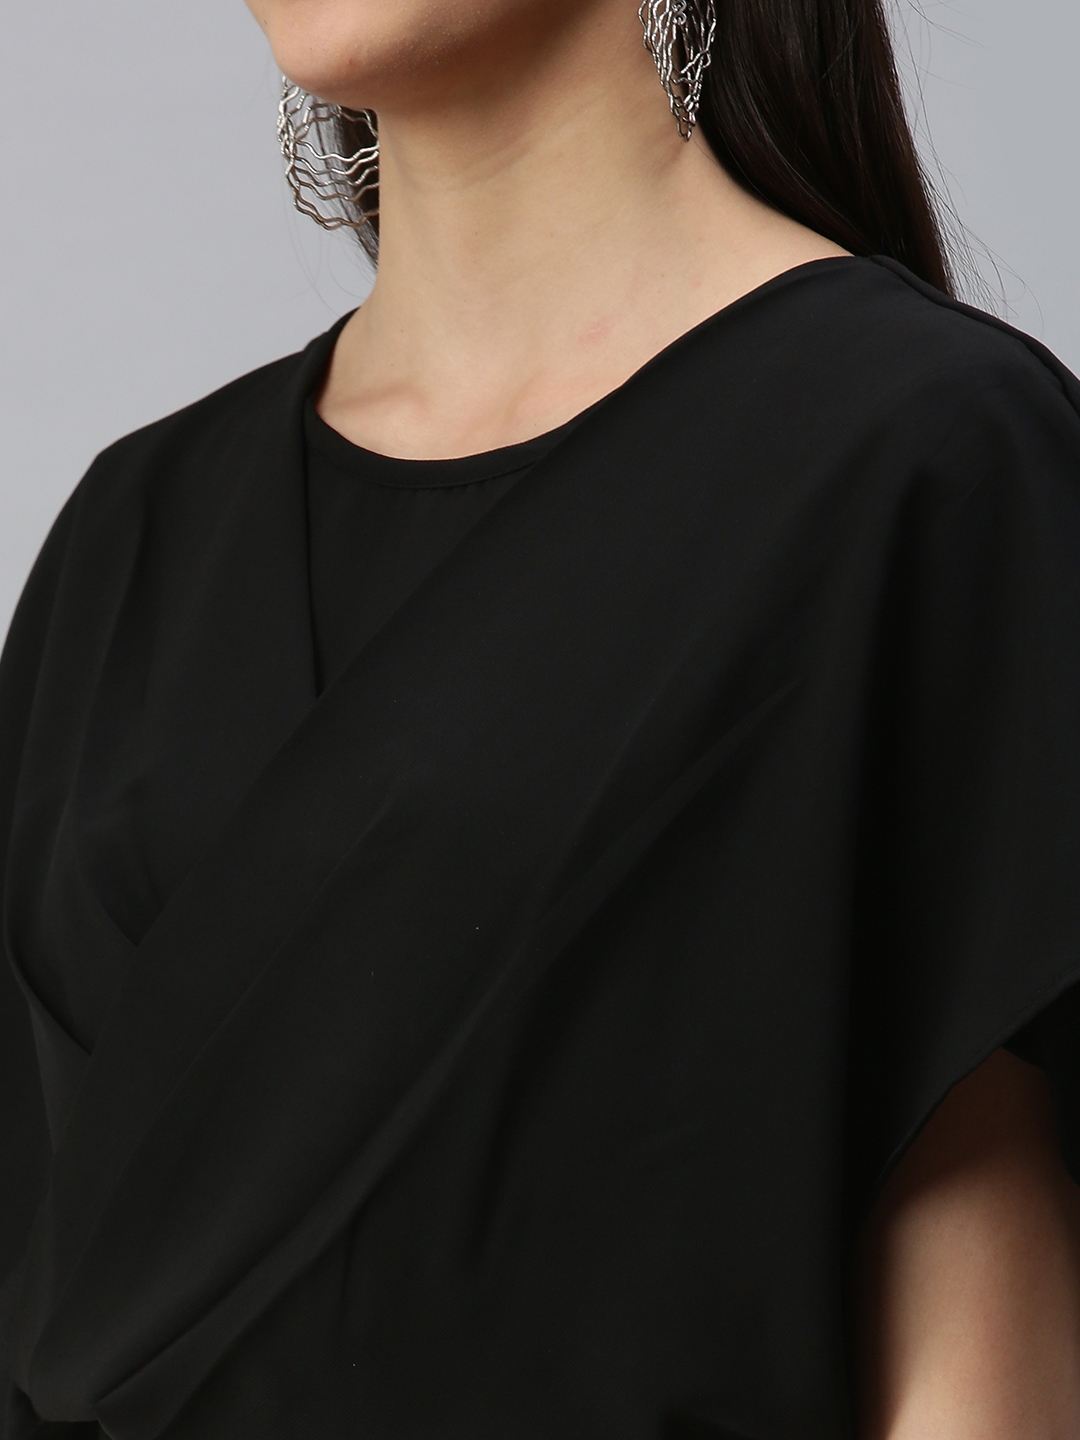 Women's Black Polyester Solid Tops